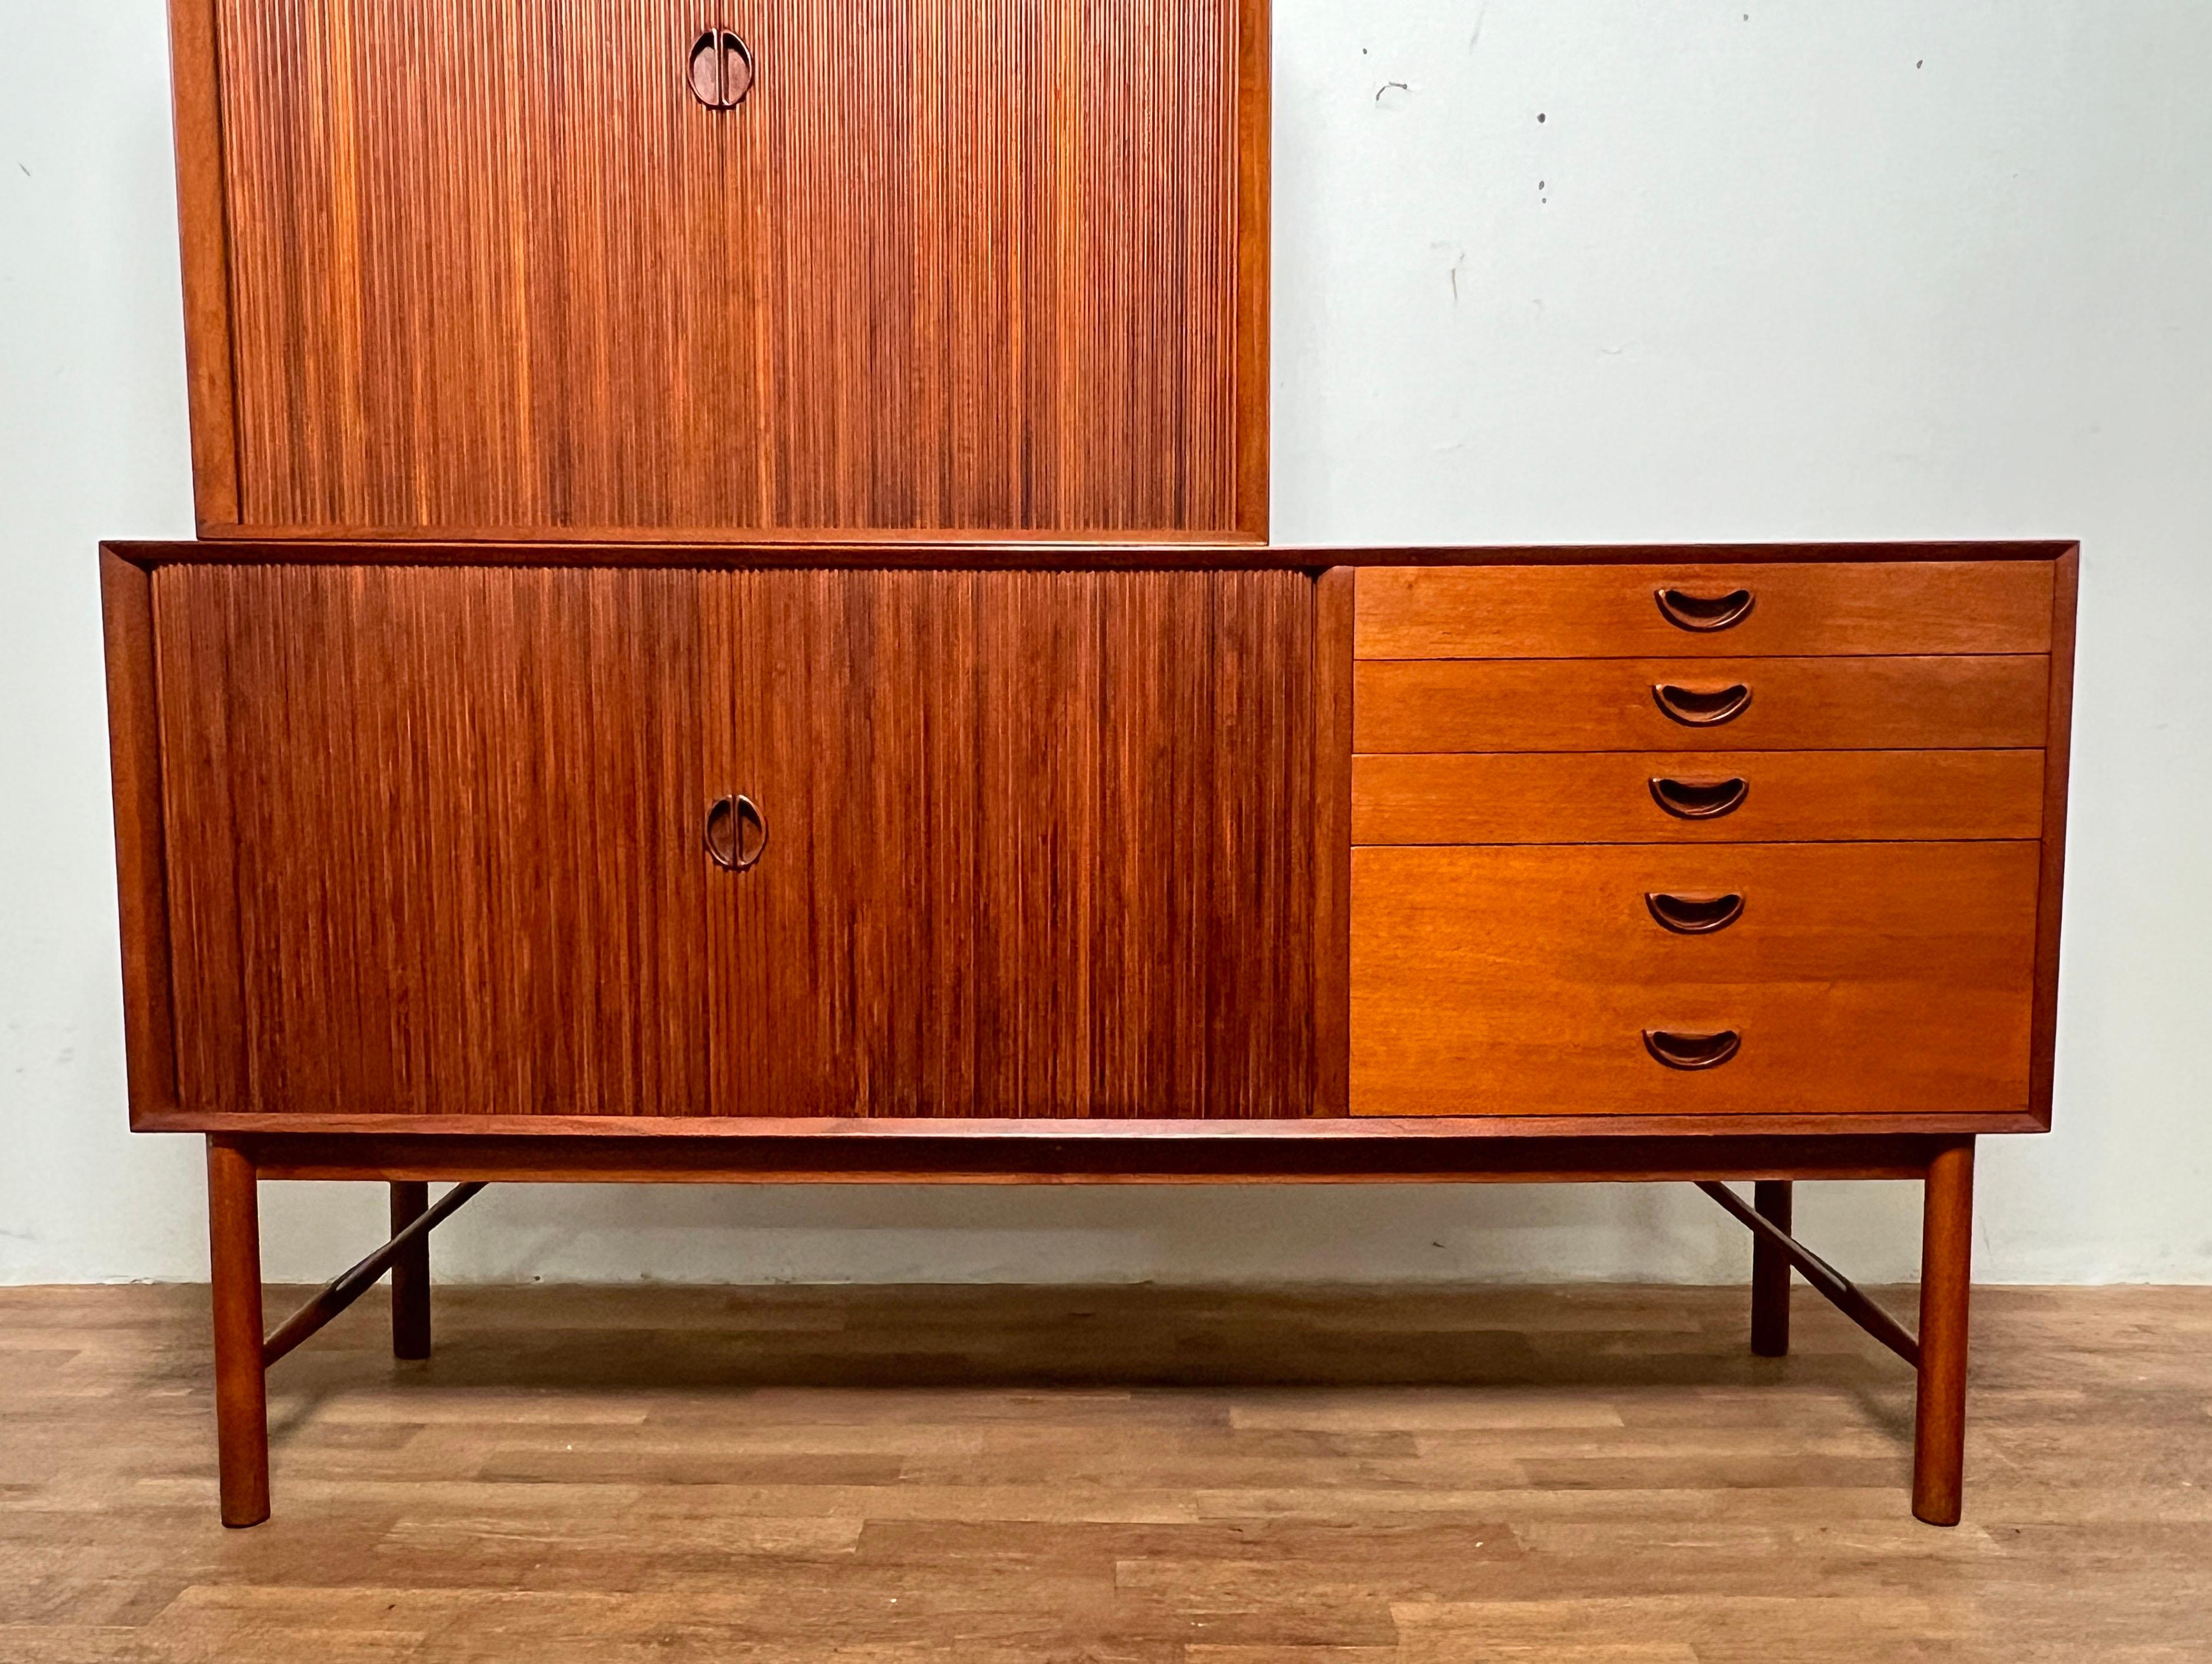 Danish solid teak tambour door credenza by Peter Hvidt for Soborg Mobler. This example features a matching tamboured top cabinet, with both pieces displaying the designer’s signature finger joinery.  Circa 1960s.

The credenza measures approx: 65